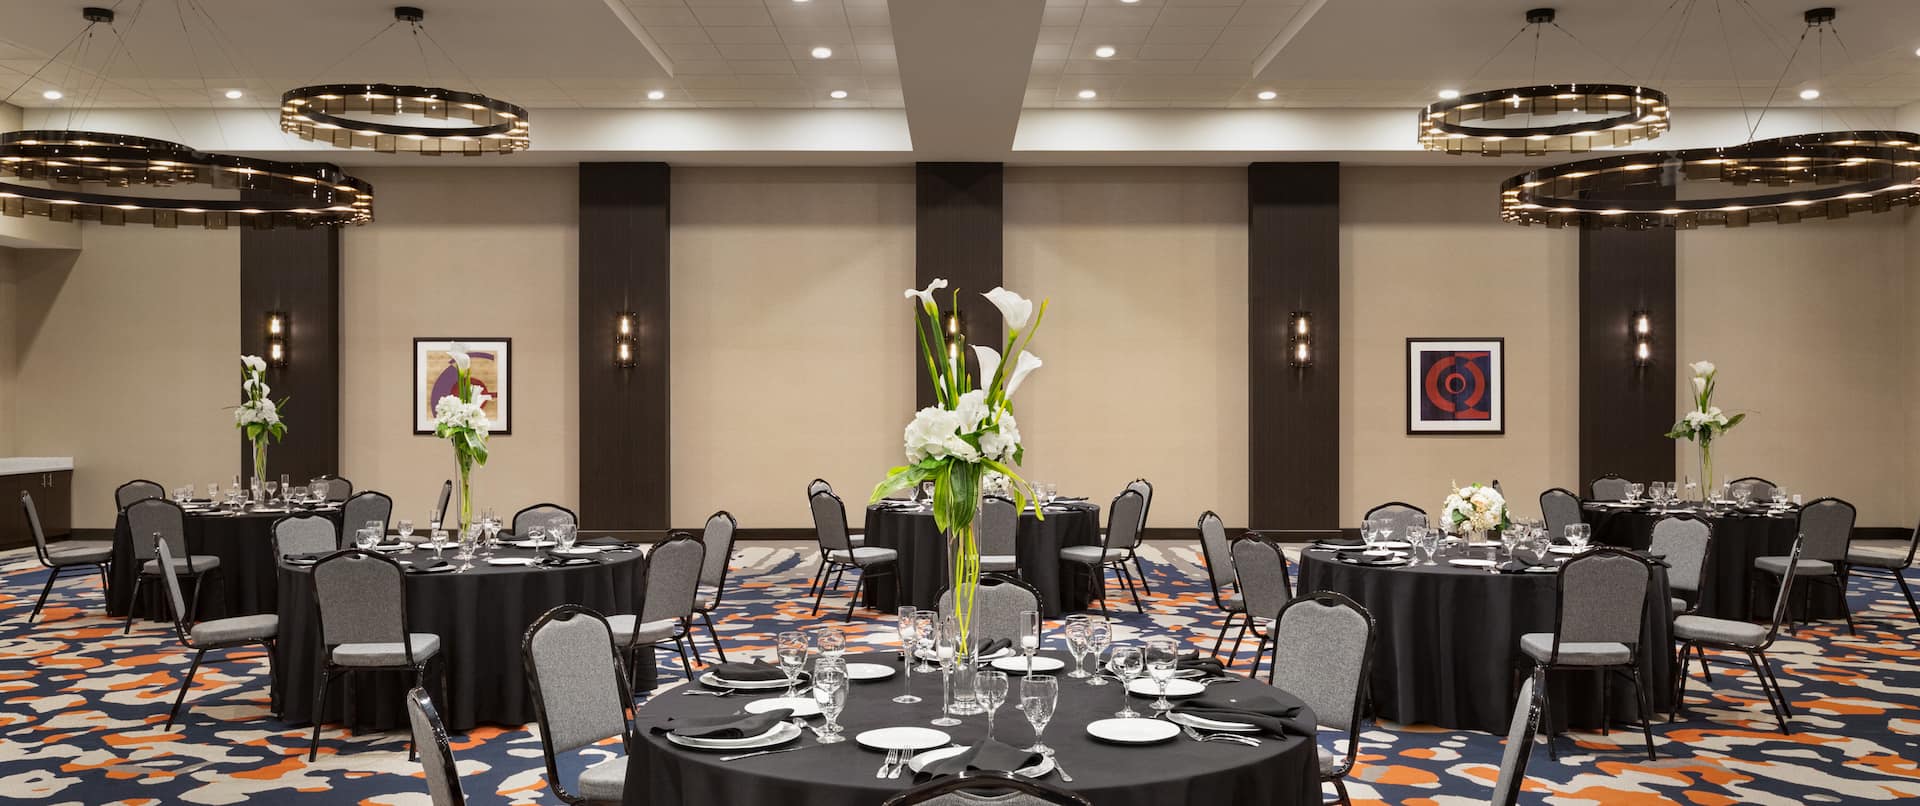 spacious meeting room banquet set up, round tables, chairs, dinner ware, flower centerpieces